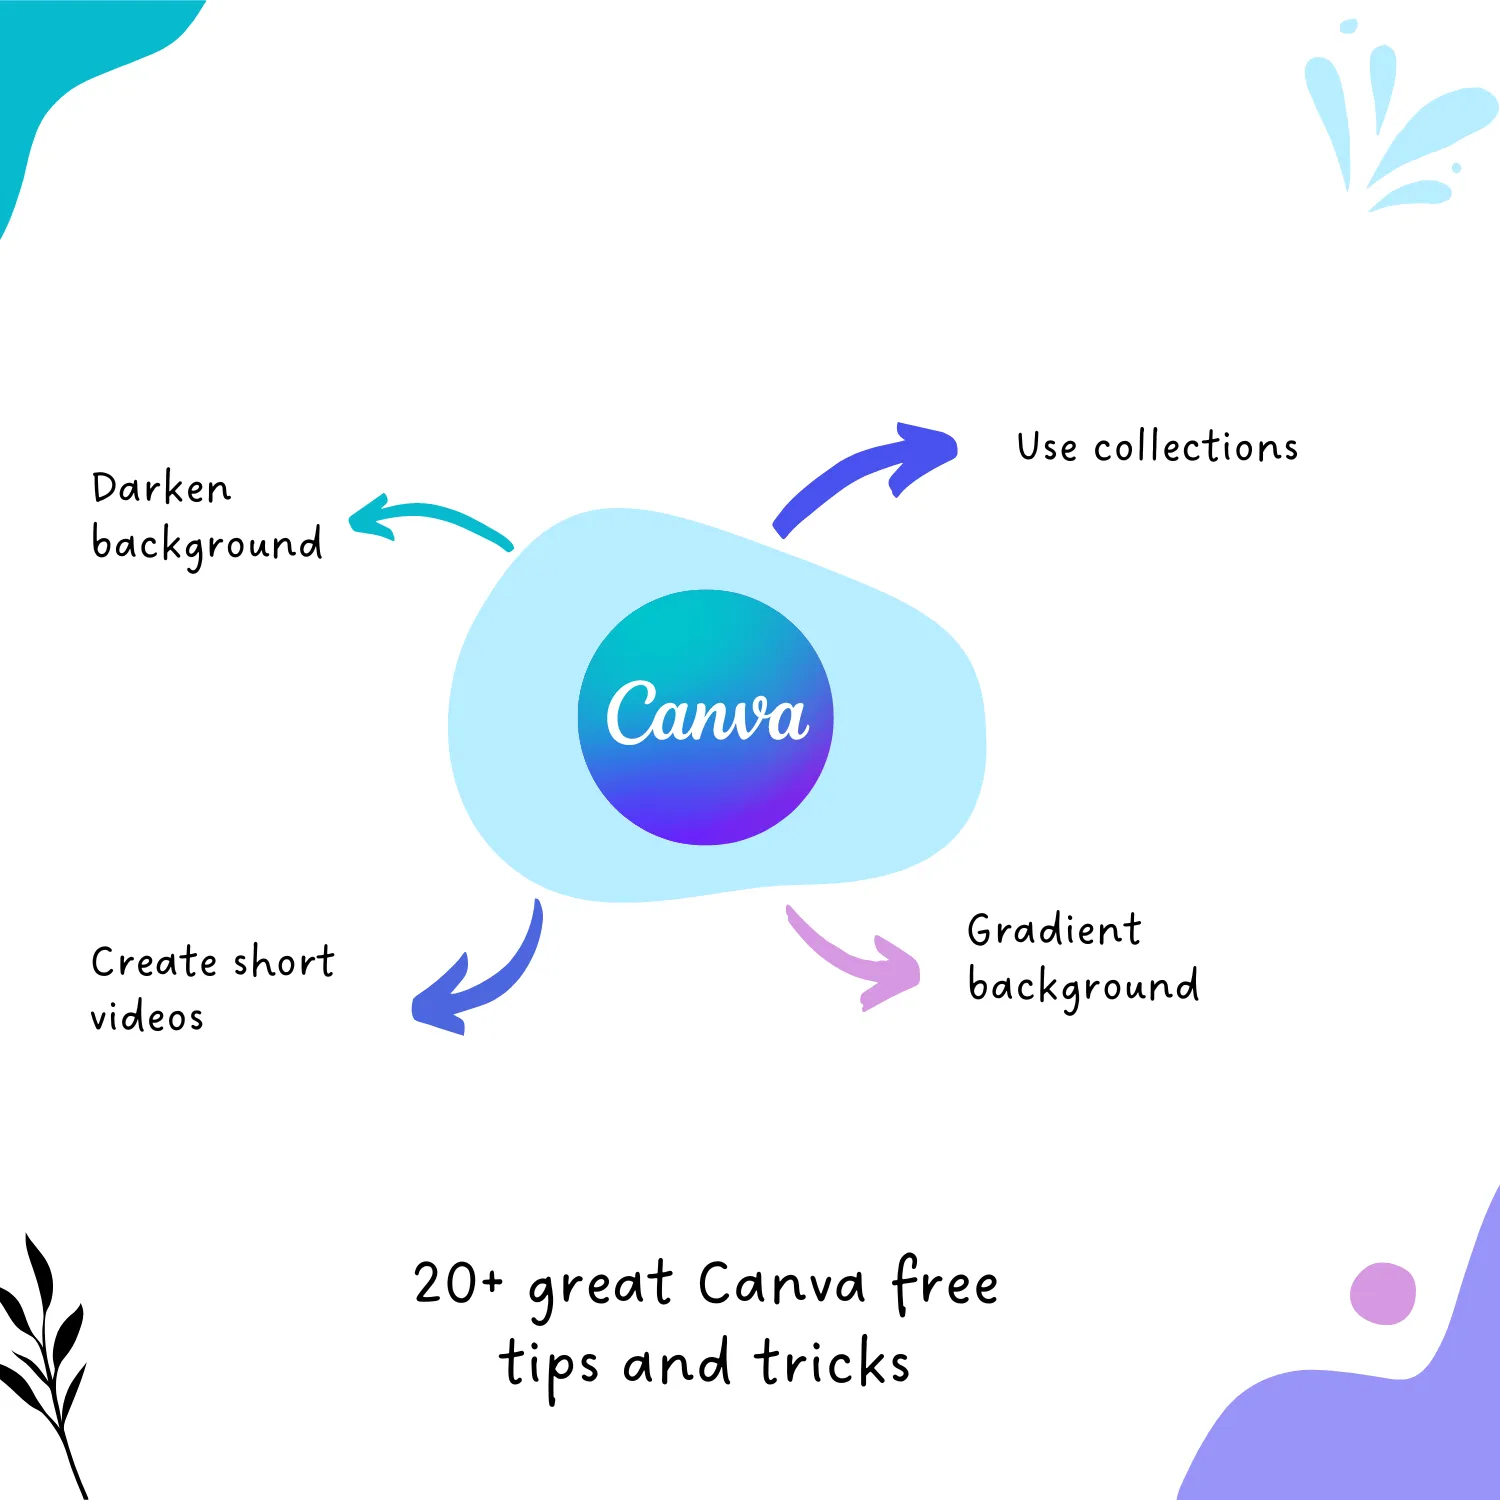 26 Free Canva Tips and Tricks